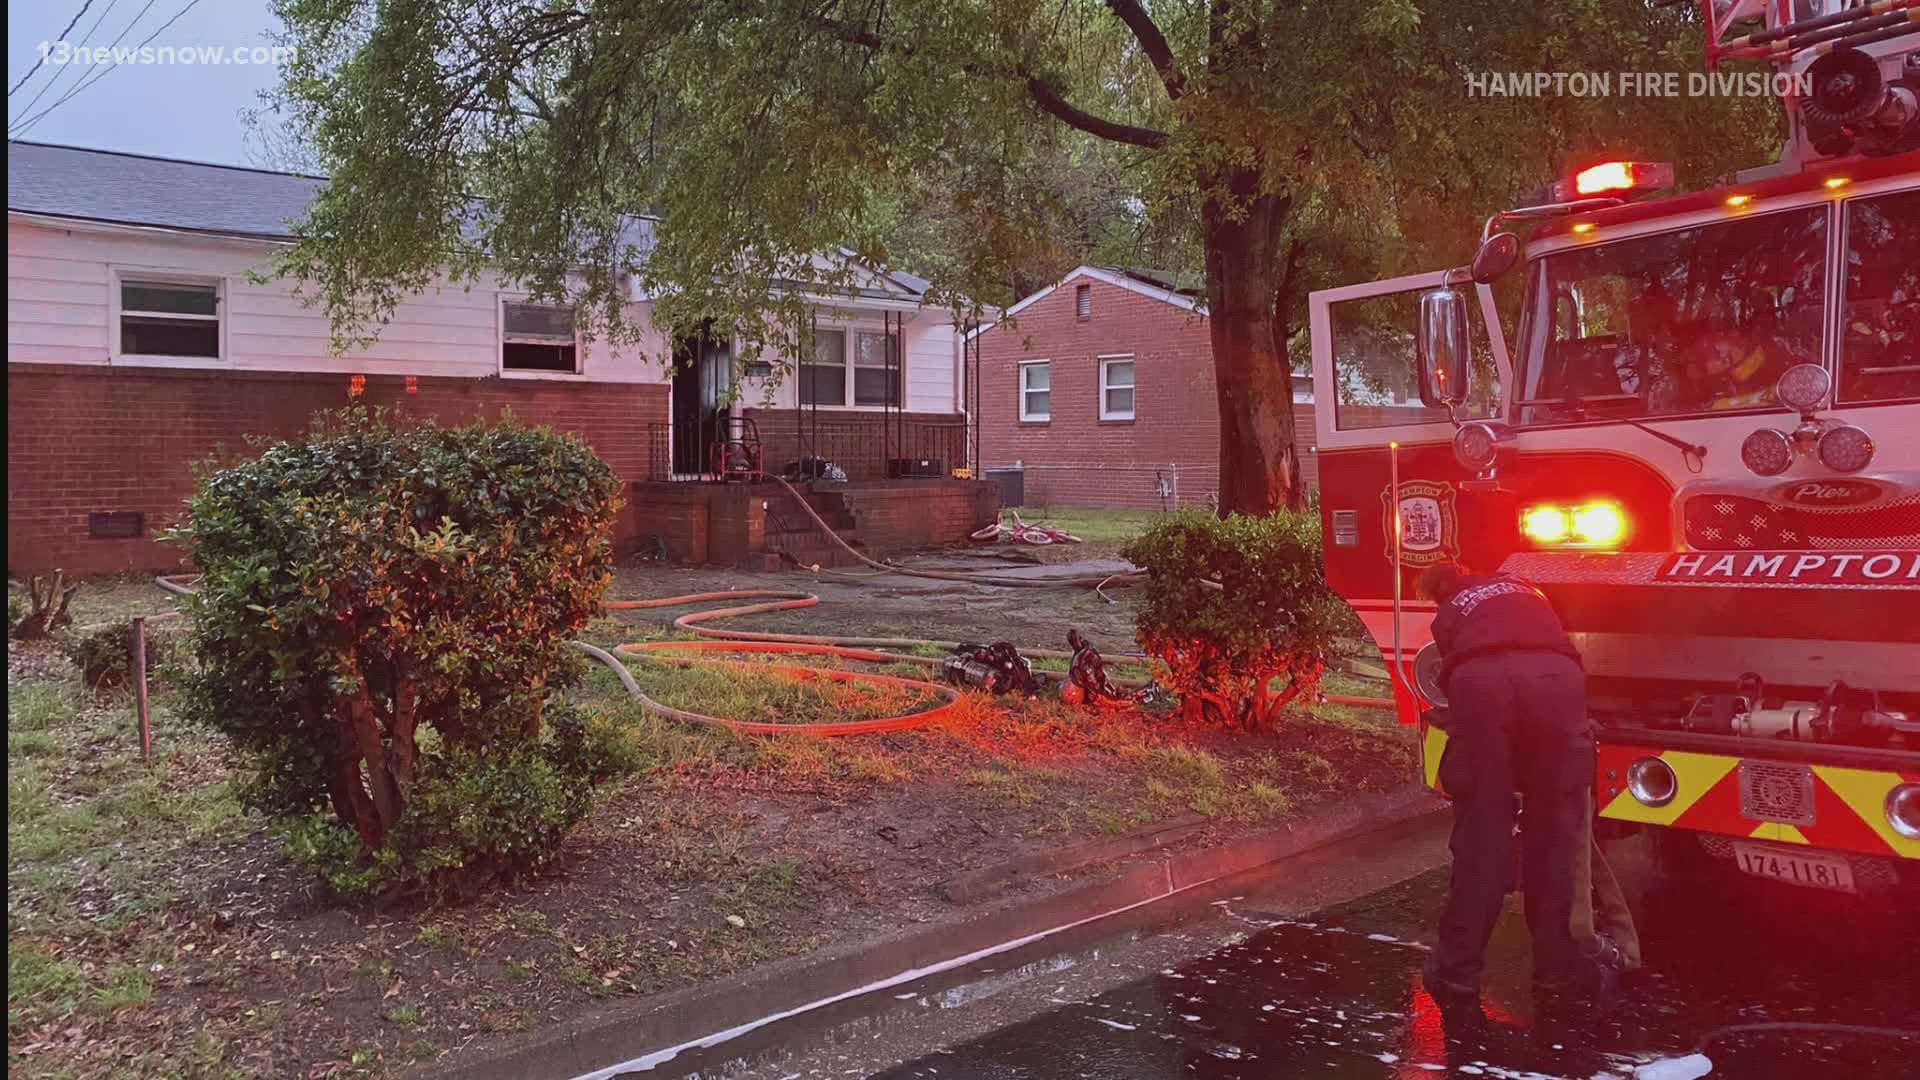 The fire happened on Cornelius Drive just before 7 p.m.